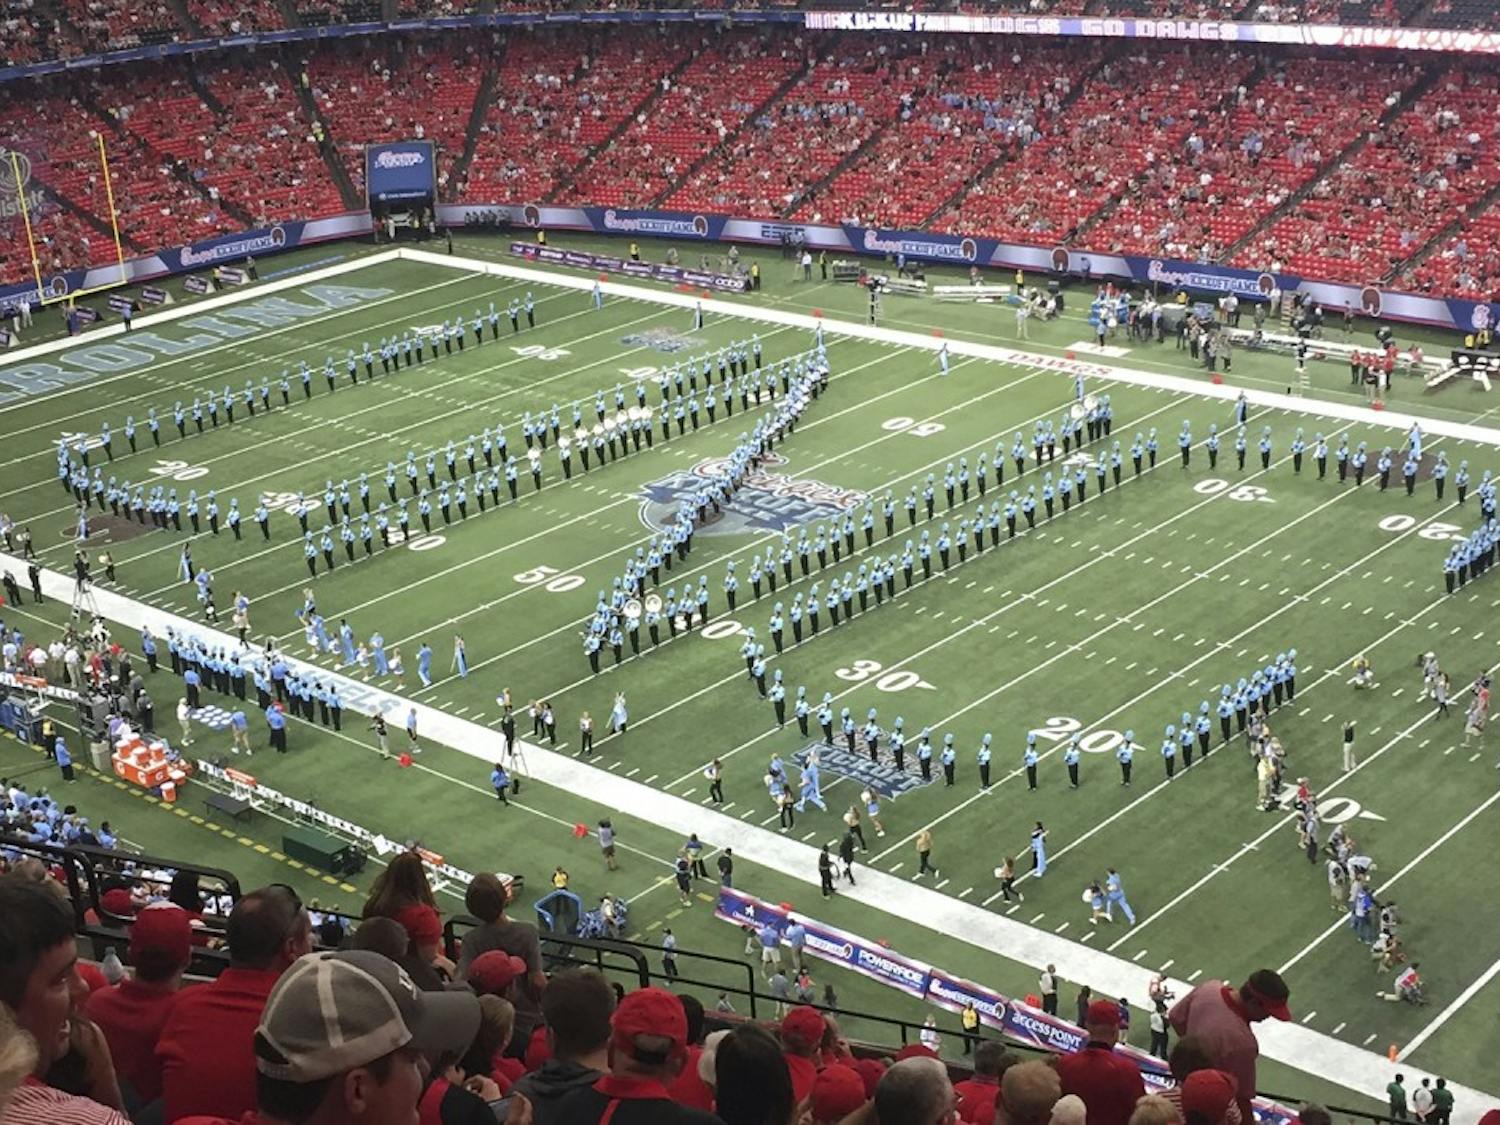 The UNC marching band, The Marching Tar Heels, performs at the Chick-fil-A kickoff game against Georgia in Atlanta on Sep. 3.&nbsp;Photo Courtesy of&nbsp;Kristie&nbsp;Thompson.